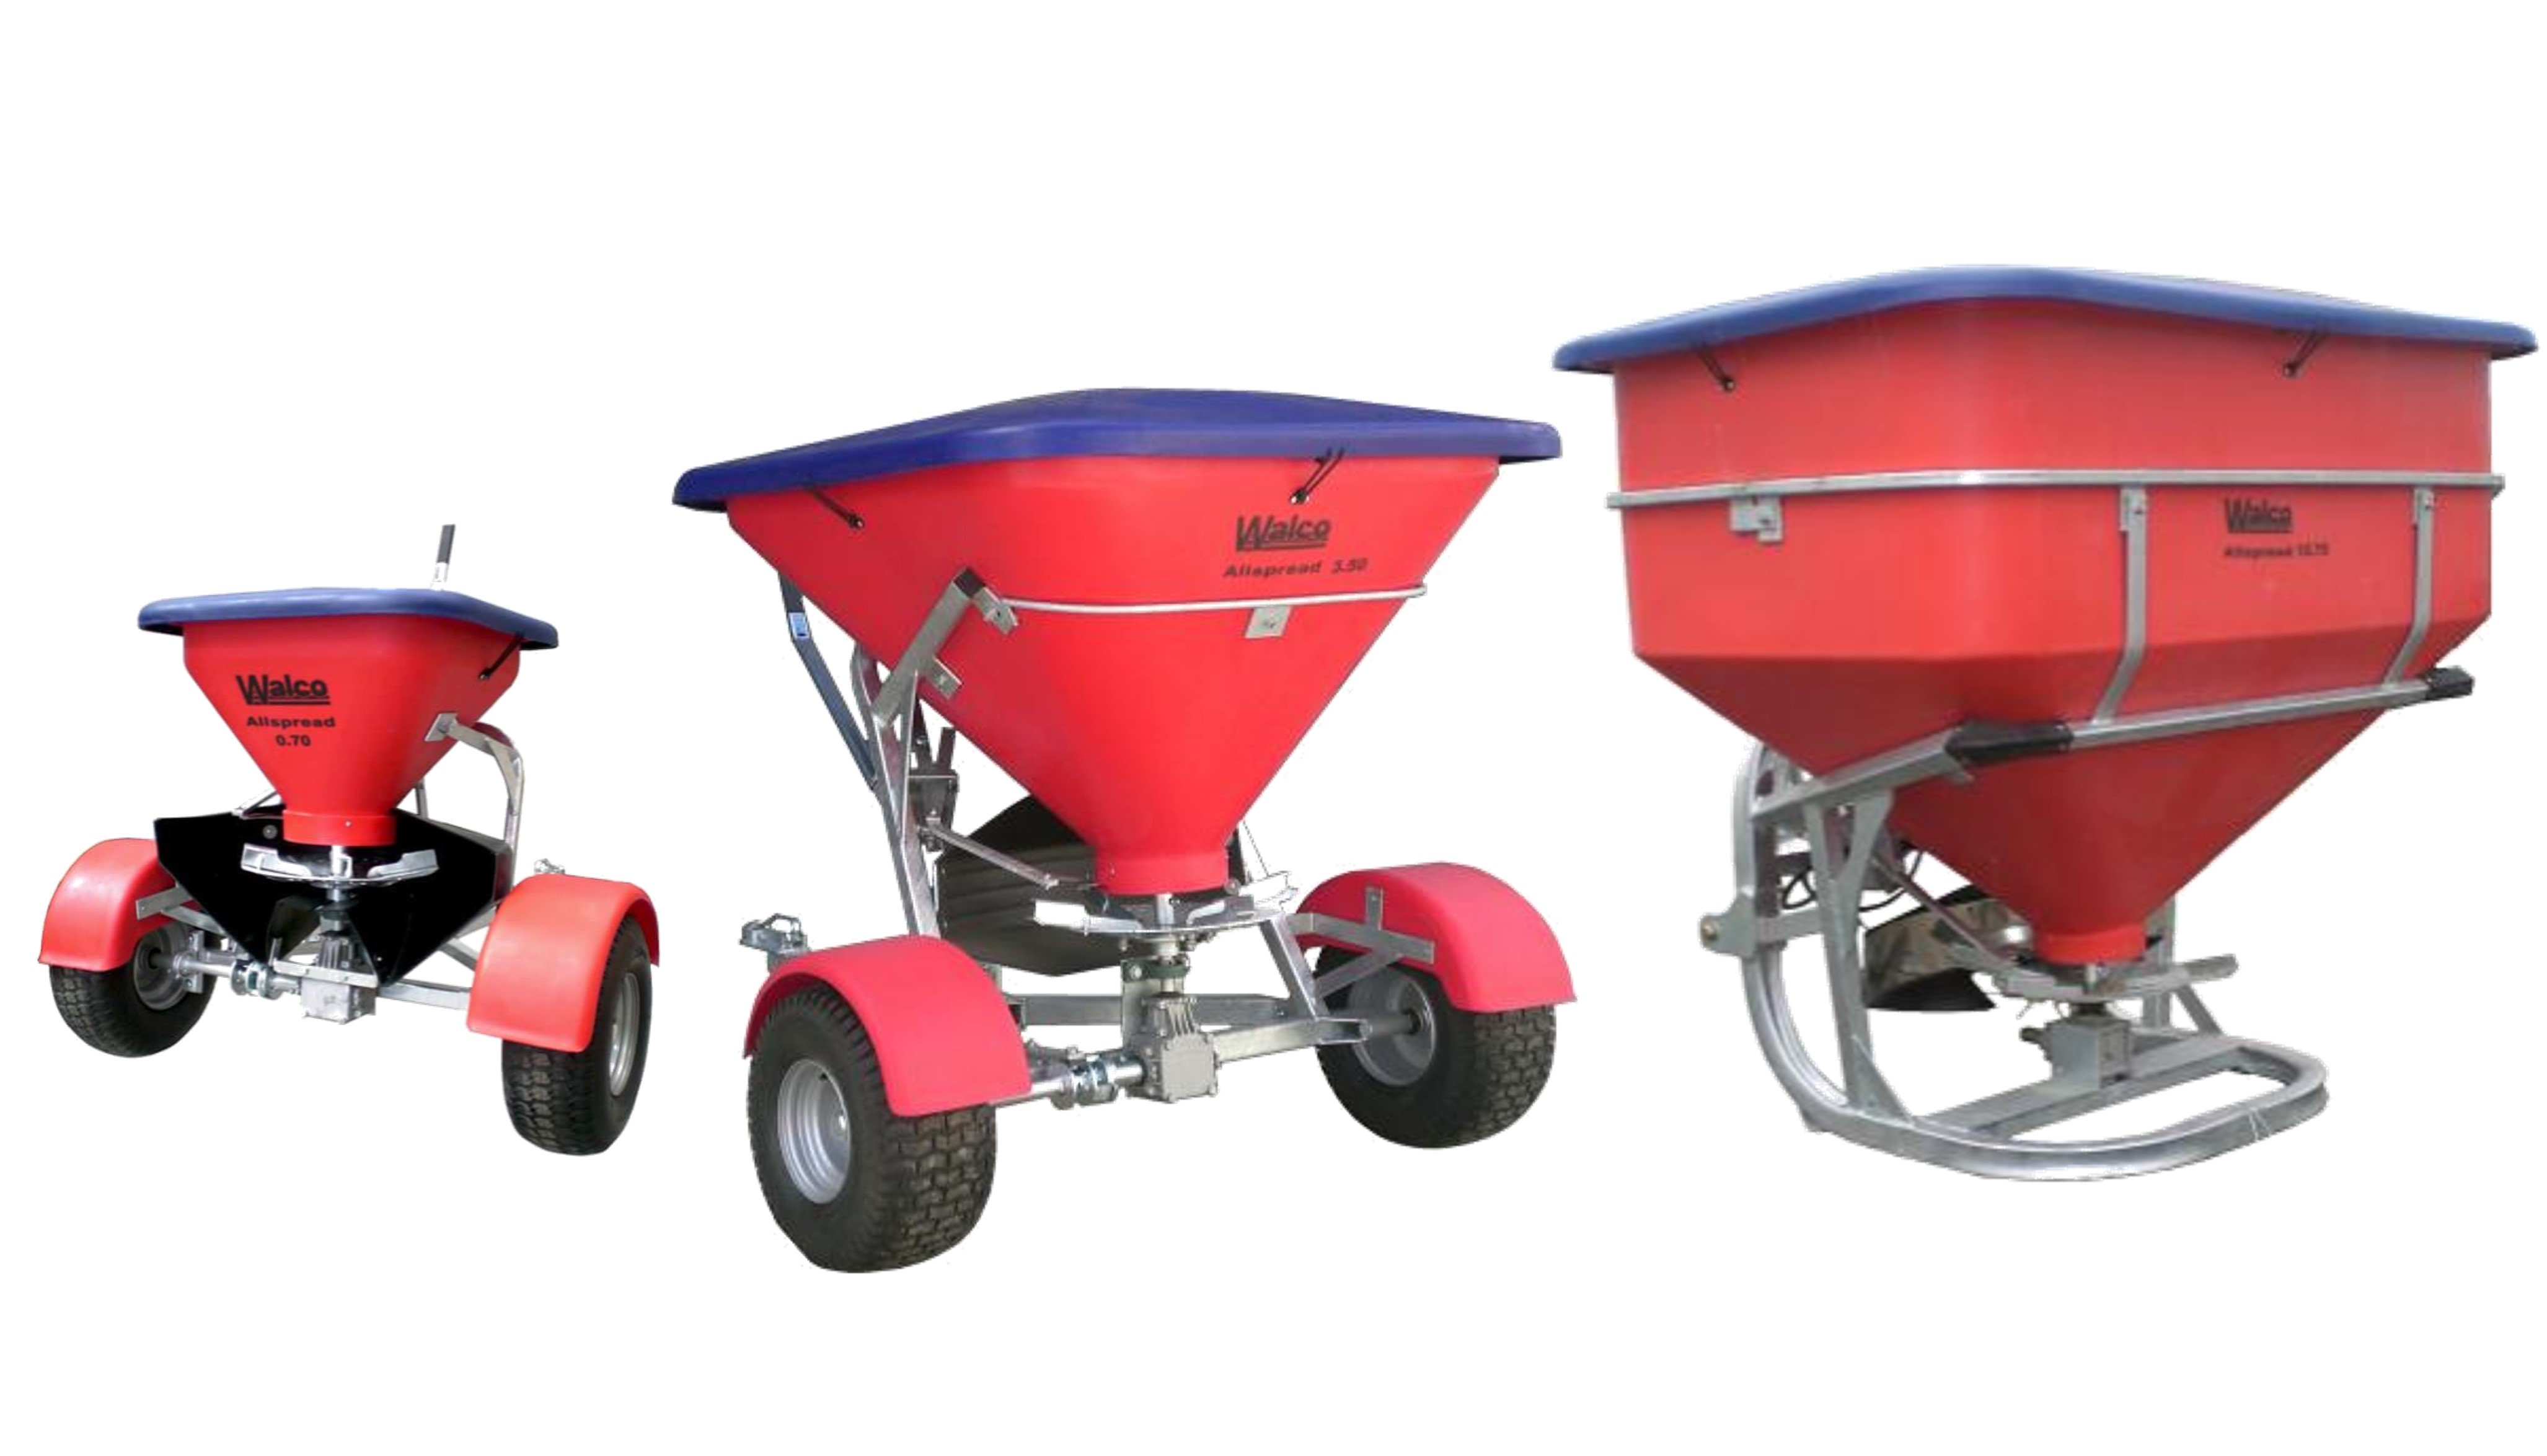 Delmade offers 5 different sizes of Walco Spreaders - 70L, 175L, 350L and 1275L.  Linkage & Trailing; Tandem, wide and single axel units avaliable